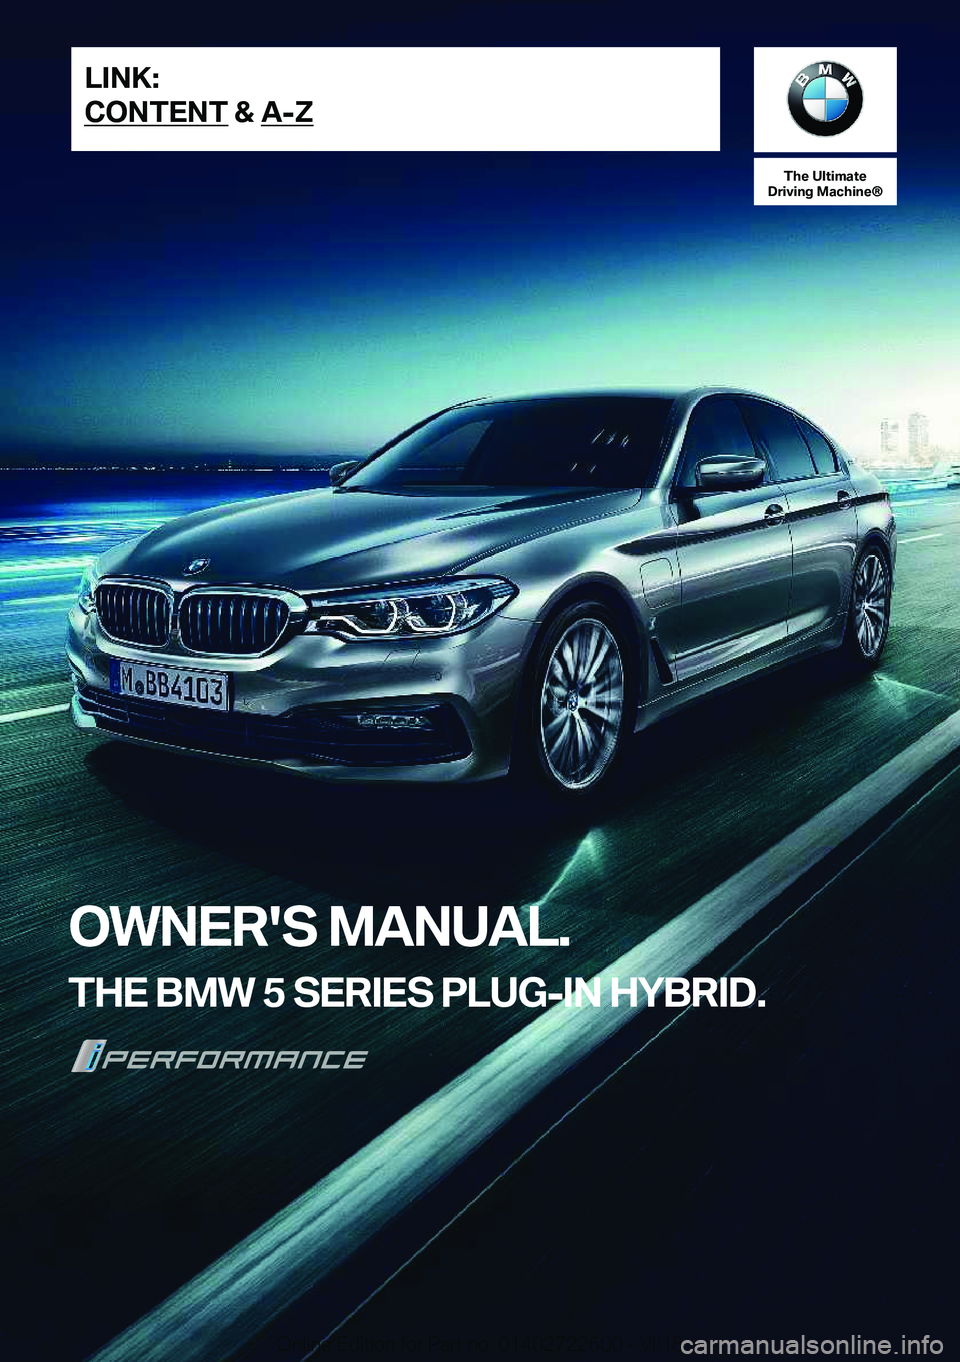 BMW 5 SERIES 2019  Owners Manual �T�h�e��U�l�t�i�m�a�t�e
�D�r�i�v�i�n�g��M�a�c�h�i�n�e�n
�O�W�N�E�R�'�S��M�A�N�U�A�L�.
�T�H�E��B�M�W��5��S�E�R�I�E�S��P�L�U�G�-�I�N��H�Y�B�R�I�D�.�L�I�N�K�:
�C�O�N�T�E�N�T��&��A�-�Z�O�n�l